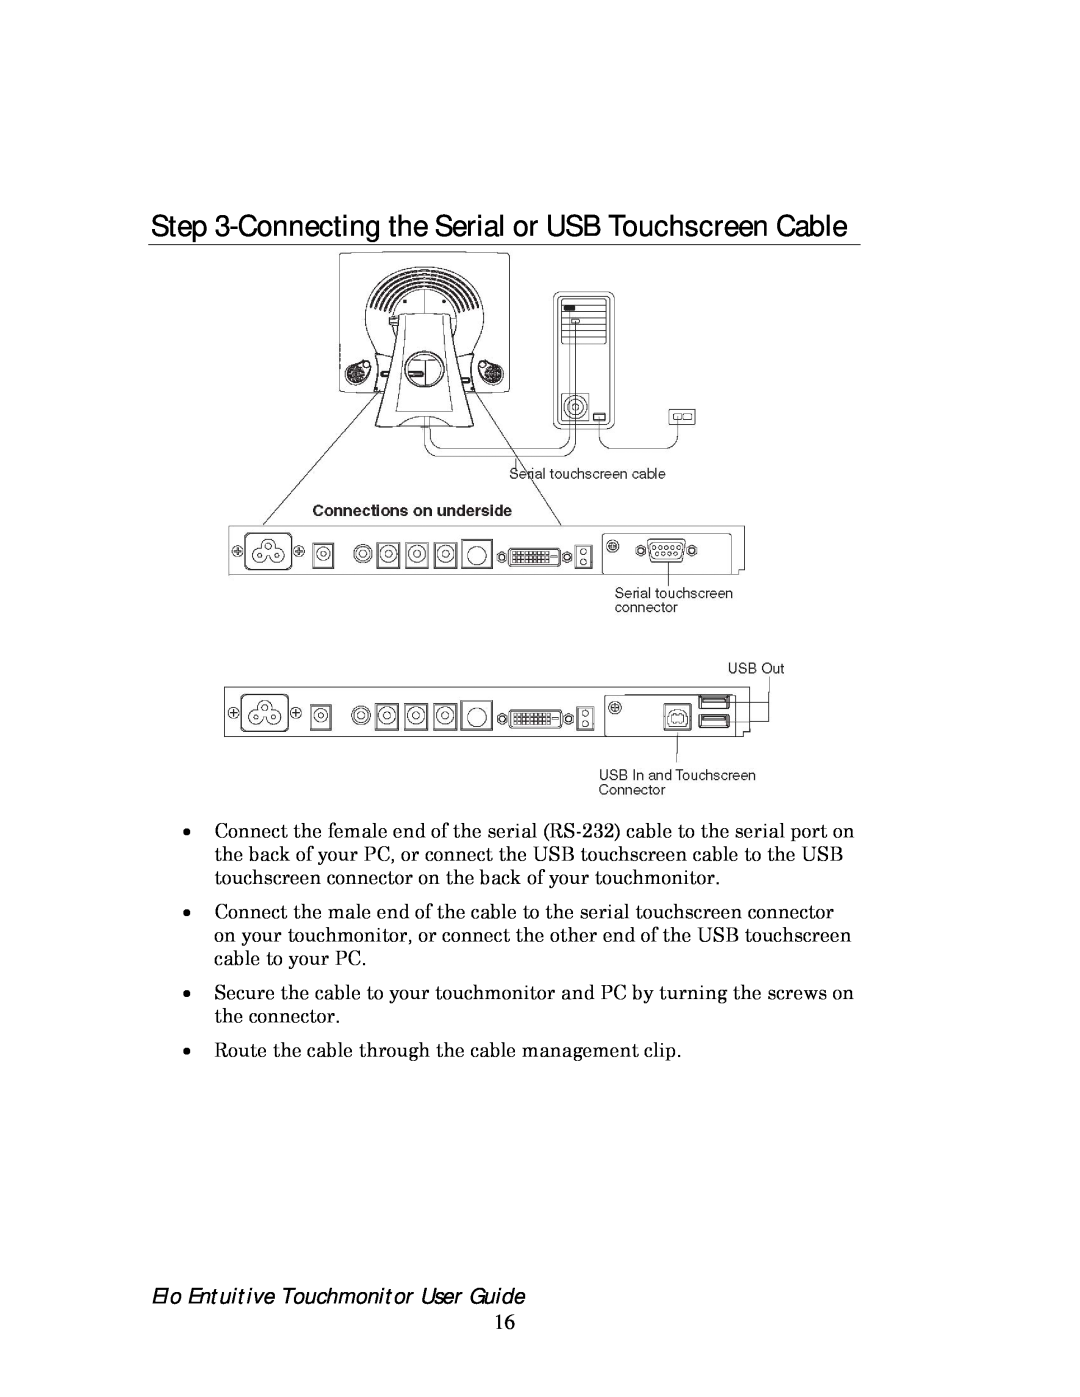 Elo TouchSystems 192XL-XXWA-1 Series Connecting the Serial or USB Touchscreen Cable, Elo Entuitive Touchmonitor User Guide 